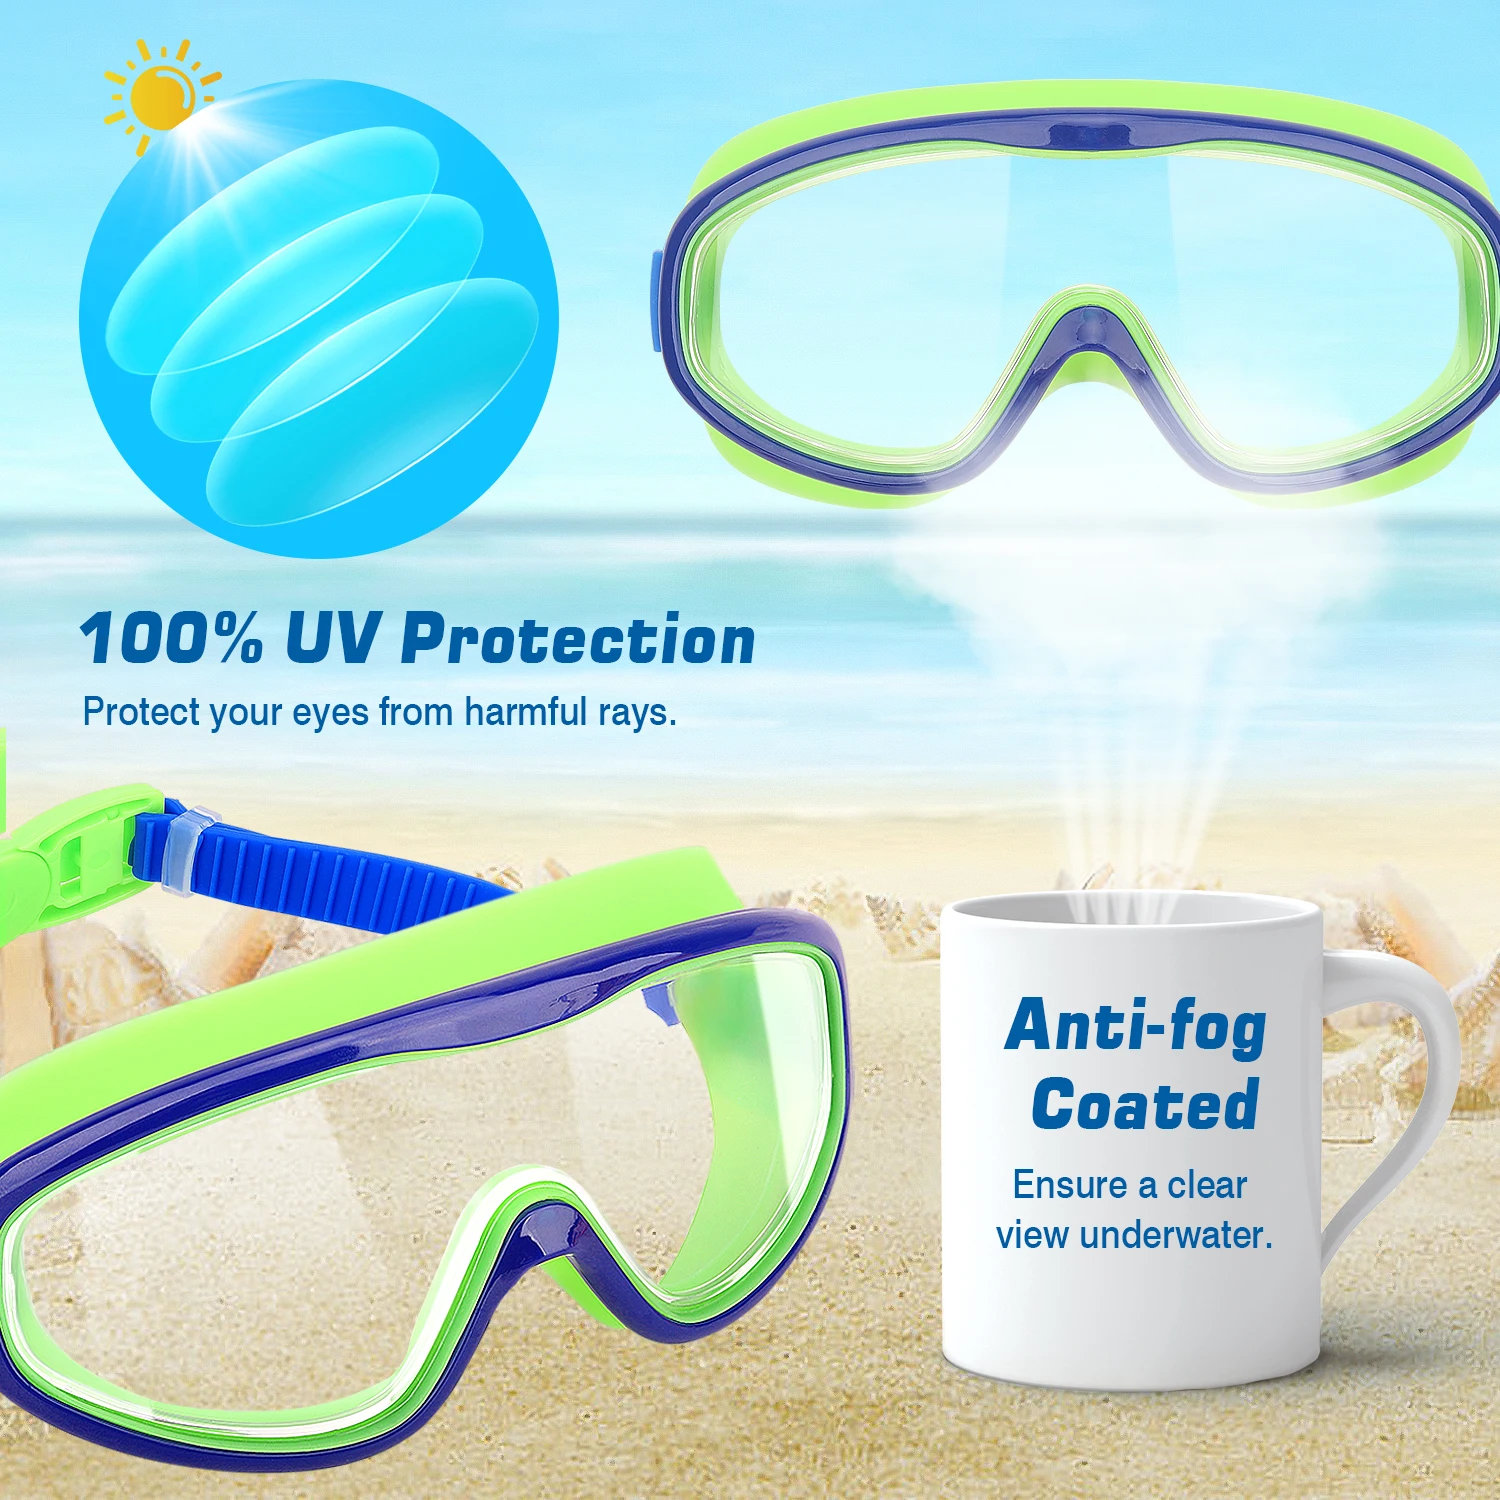 MoKo Swimming Goggles for Kids 2 Pack,UV Protection Anti Fog No Leaking Clear Wide Vision with Ear Plugs & Nose Clips